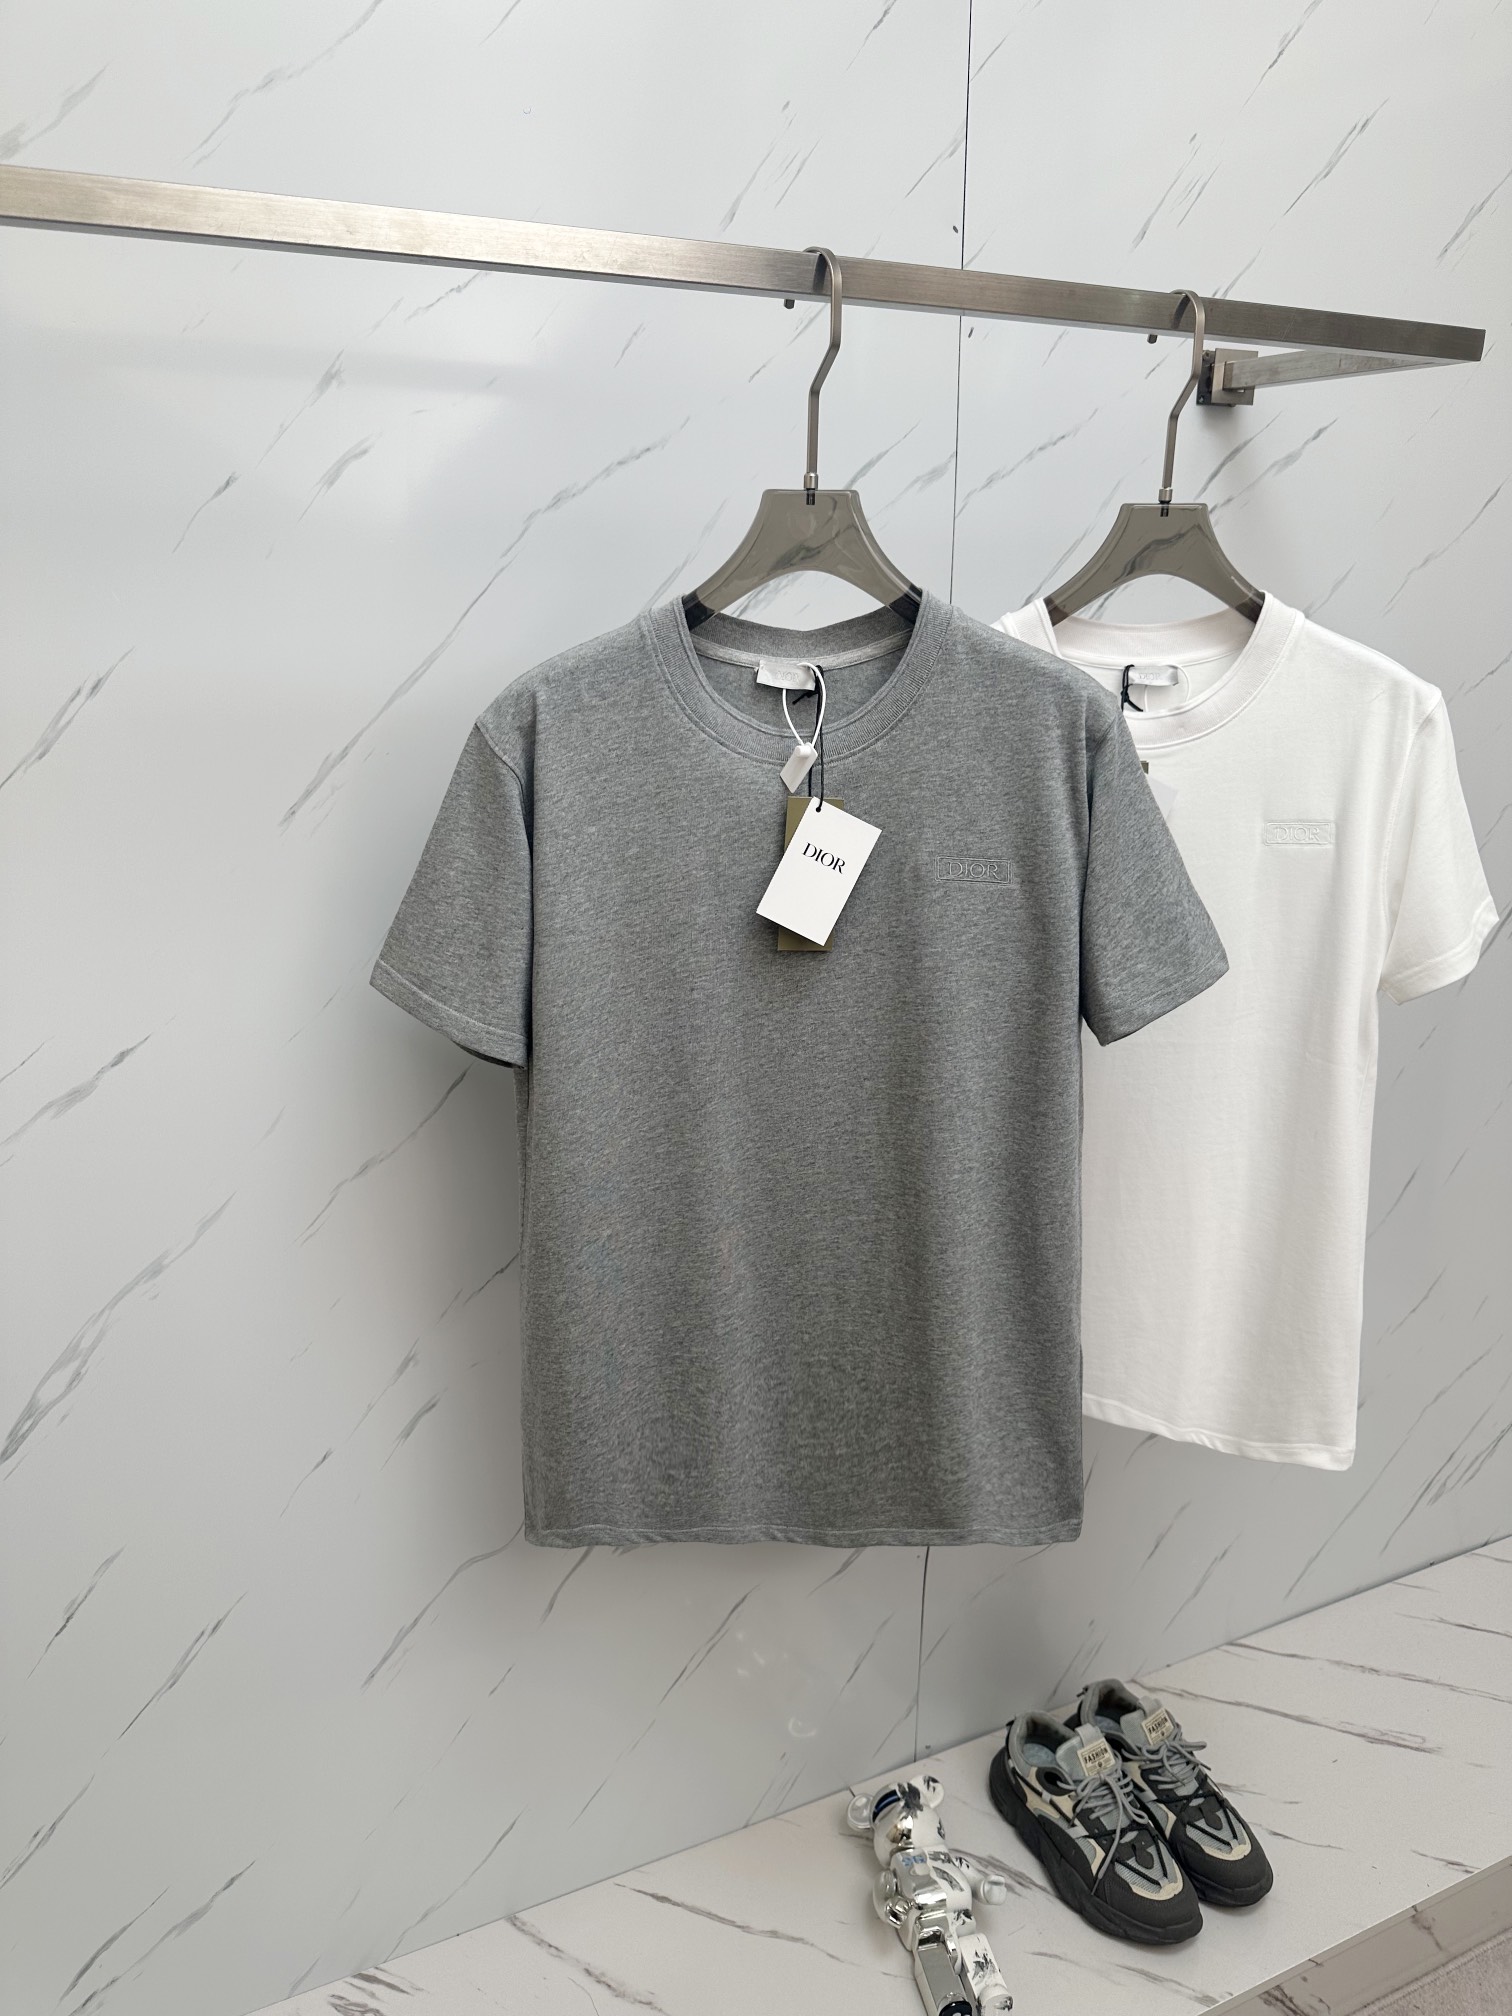 Dior Clothing T-Shirt Black Grey White Unisex Cotton Knitting Spring/Summer Collection Short Sleeve